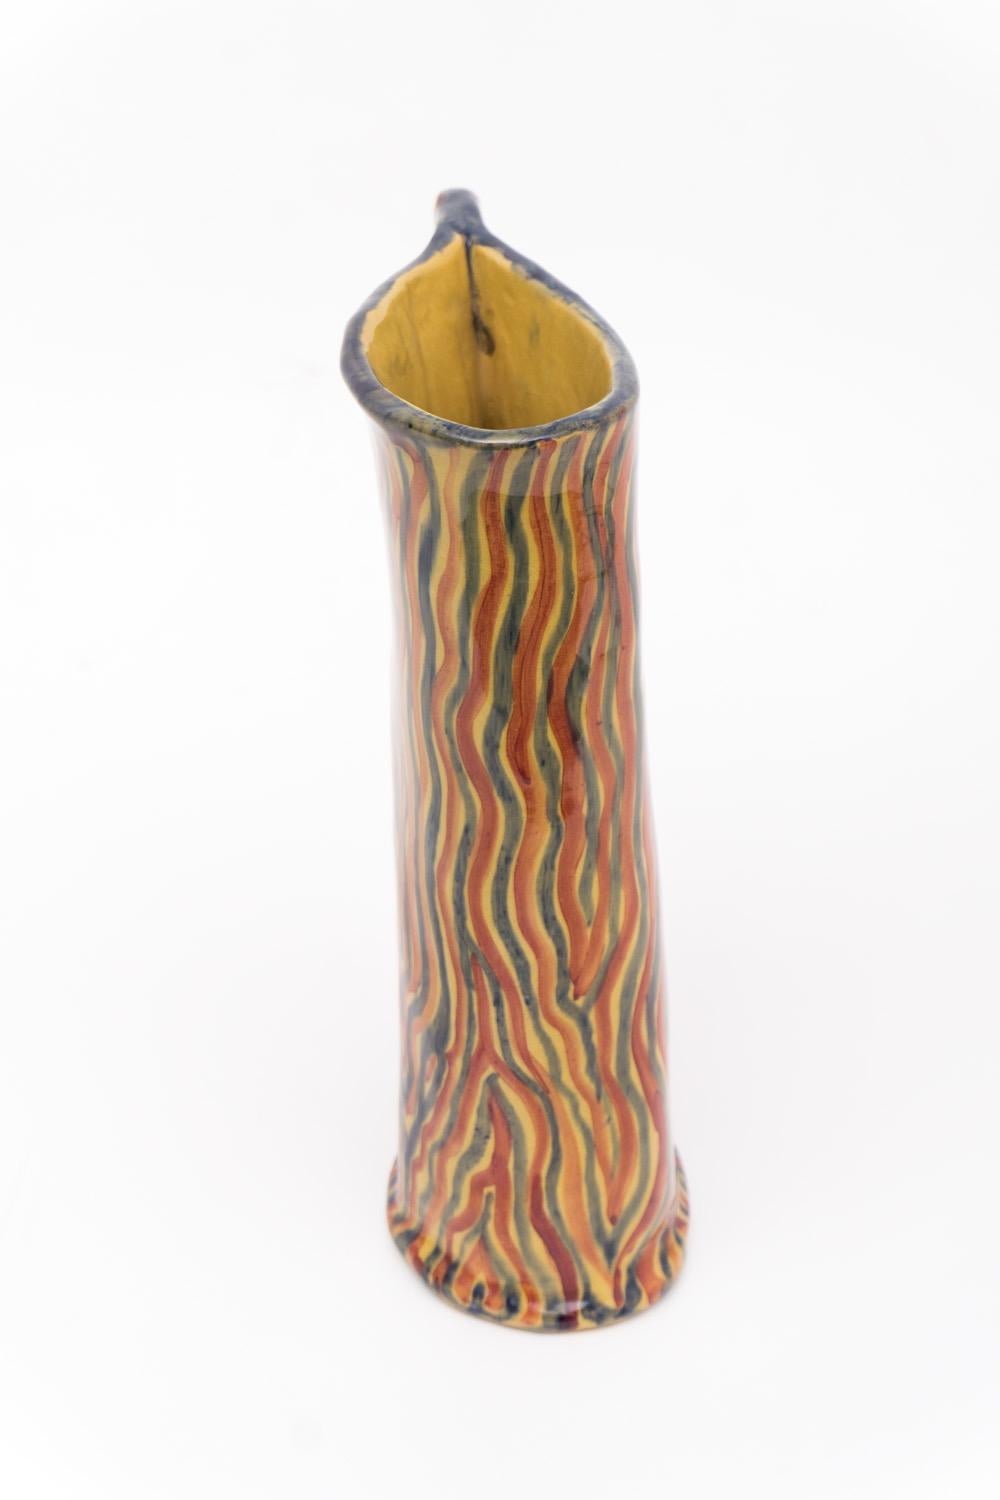 Joyful ceramic pitcher by Ceramiche Albisola. It has a smooth, glazed surface with flame like stripes in red, blue and yellow. Signed at the bottom 'Albisola', circa 1950. Albisola/Liguria is a known region for its ceramic tradition.
    